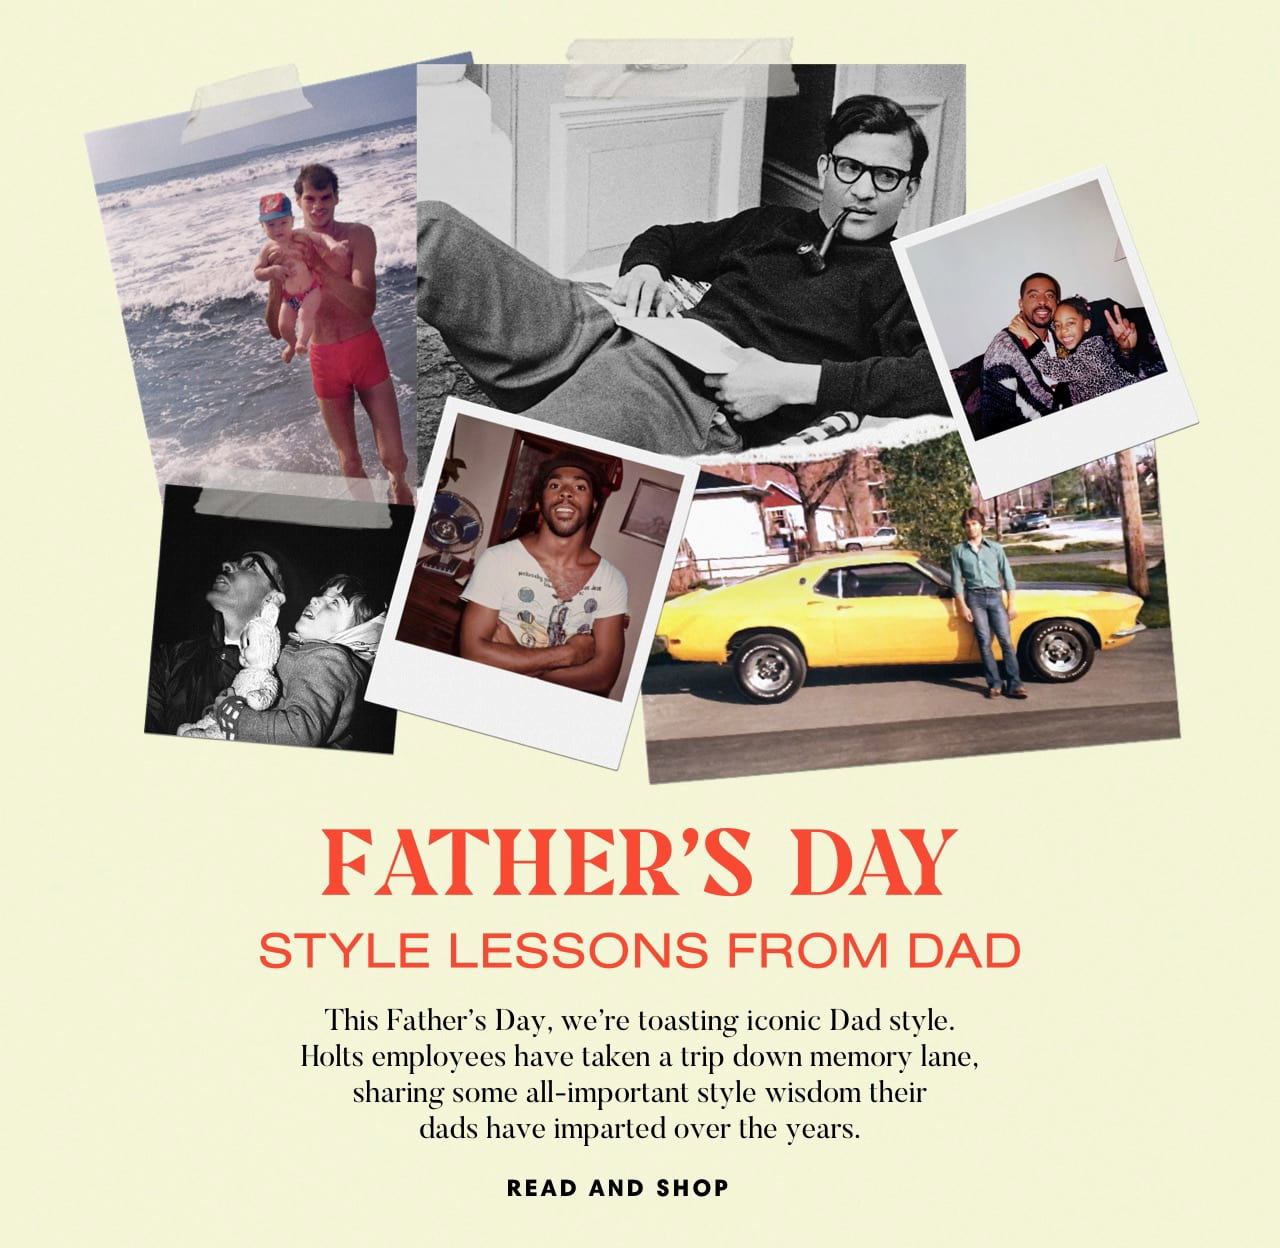 Holt Renfrew - Father's Day with Louis Vuitton Father's Day is